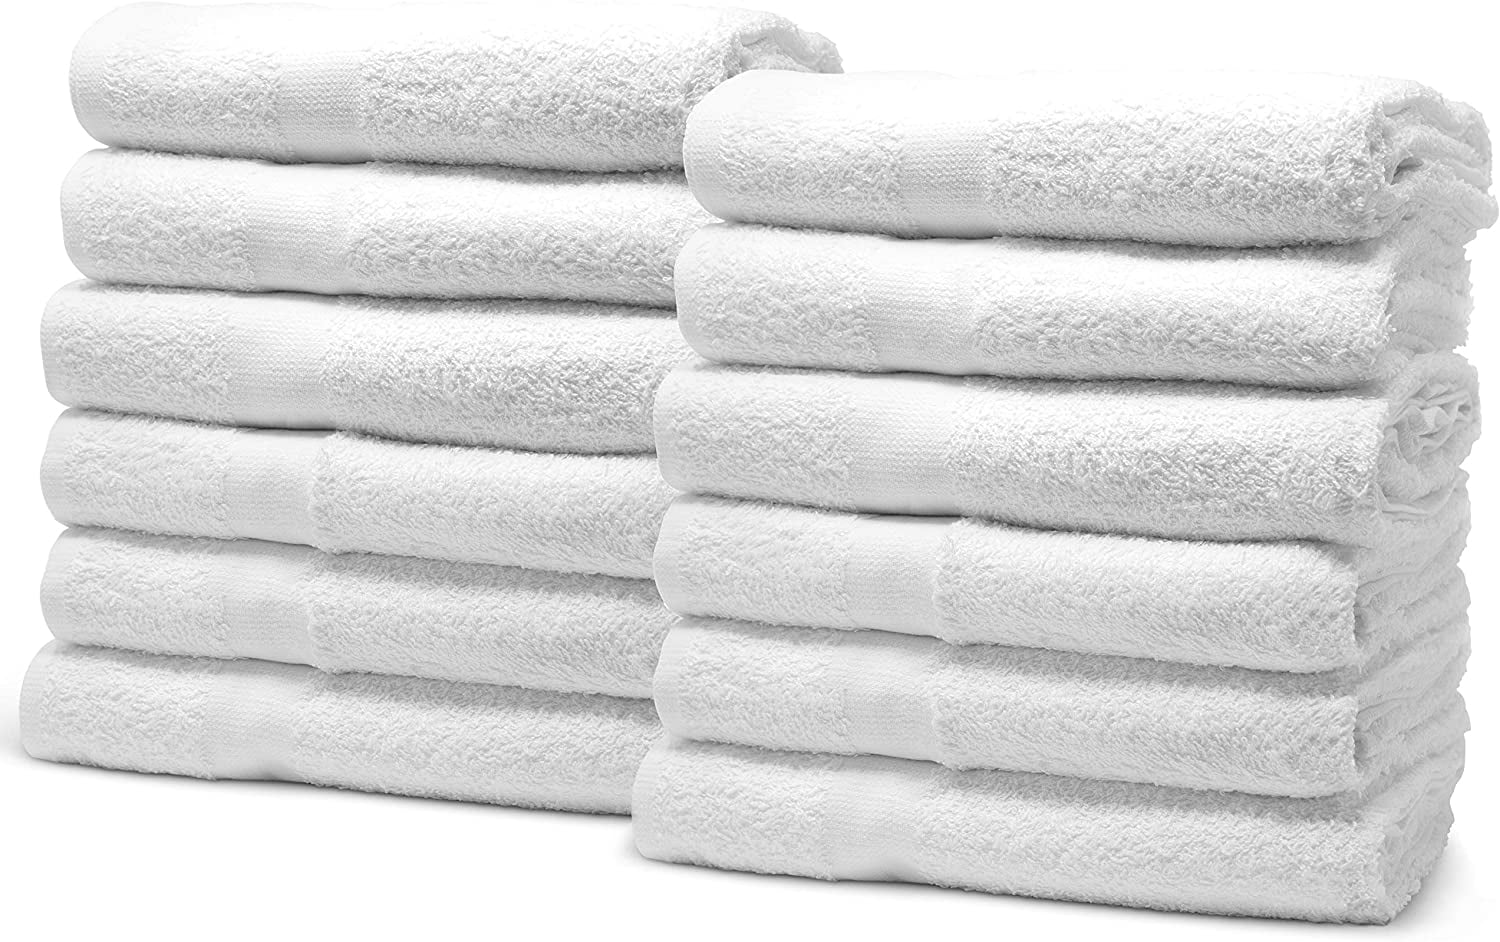 Wealuxe Small Bath Towels 22x44 Inches, 100% Cotton Lightweight Thin  Bathroom Towels for Gym, Spa, Saloon [6-Pack, Grey]